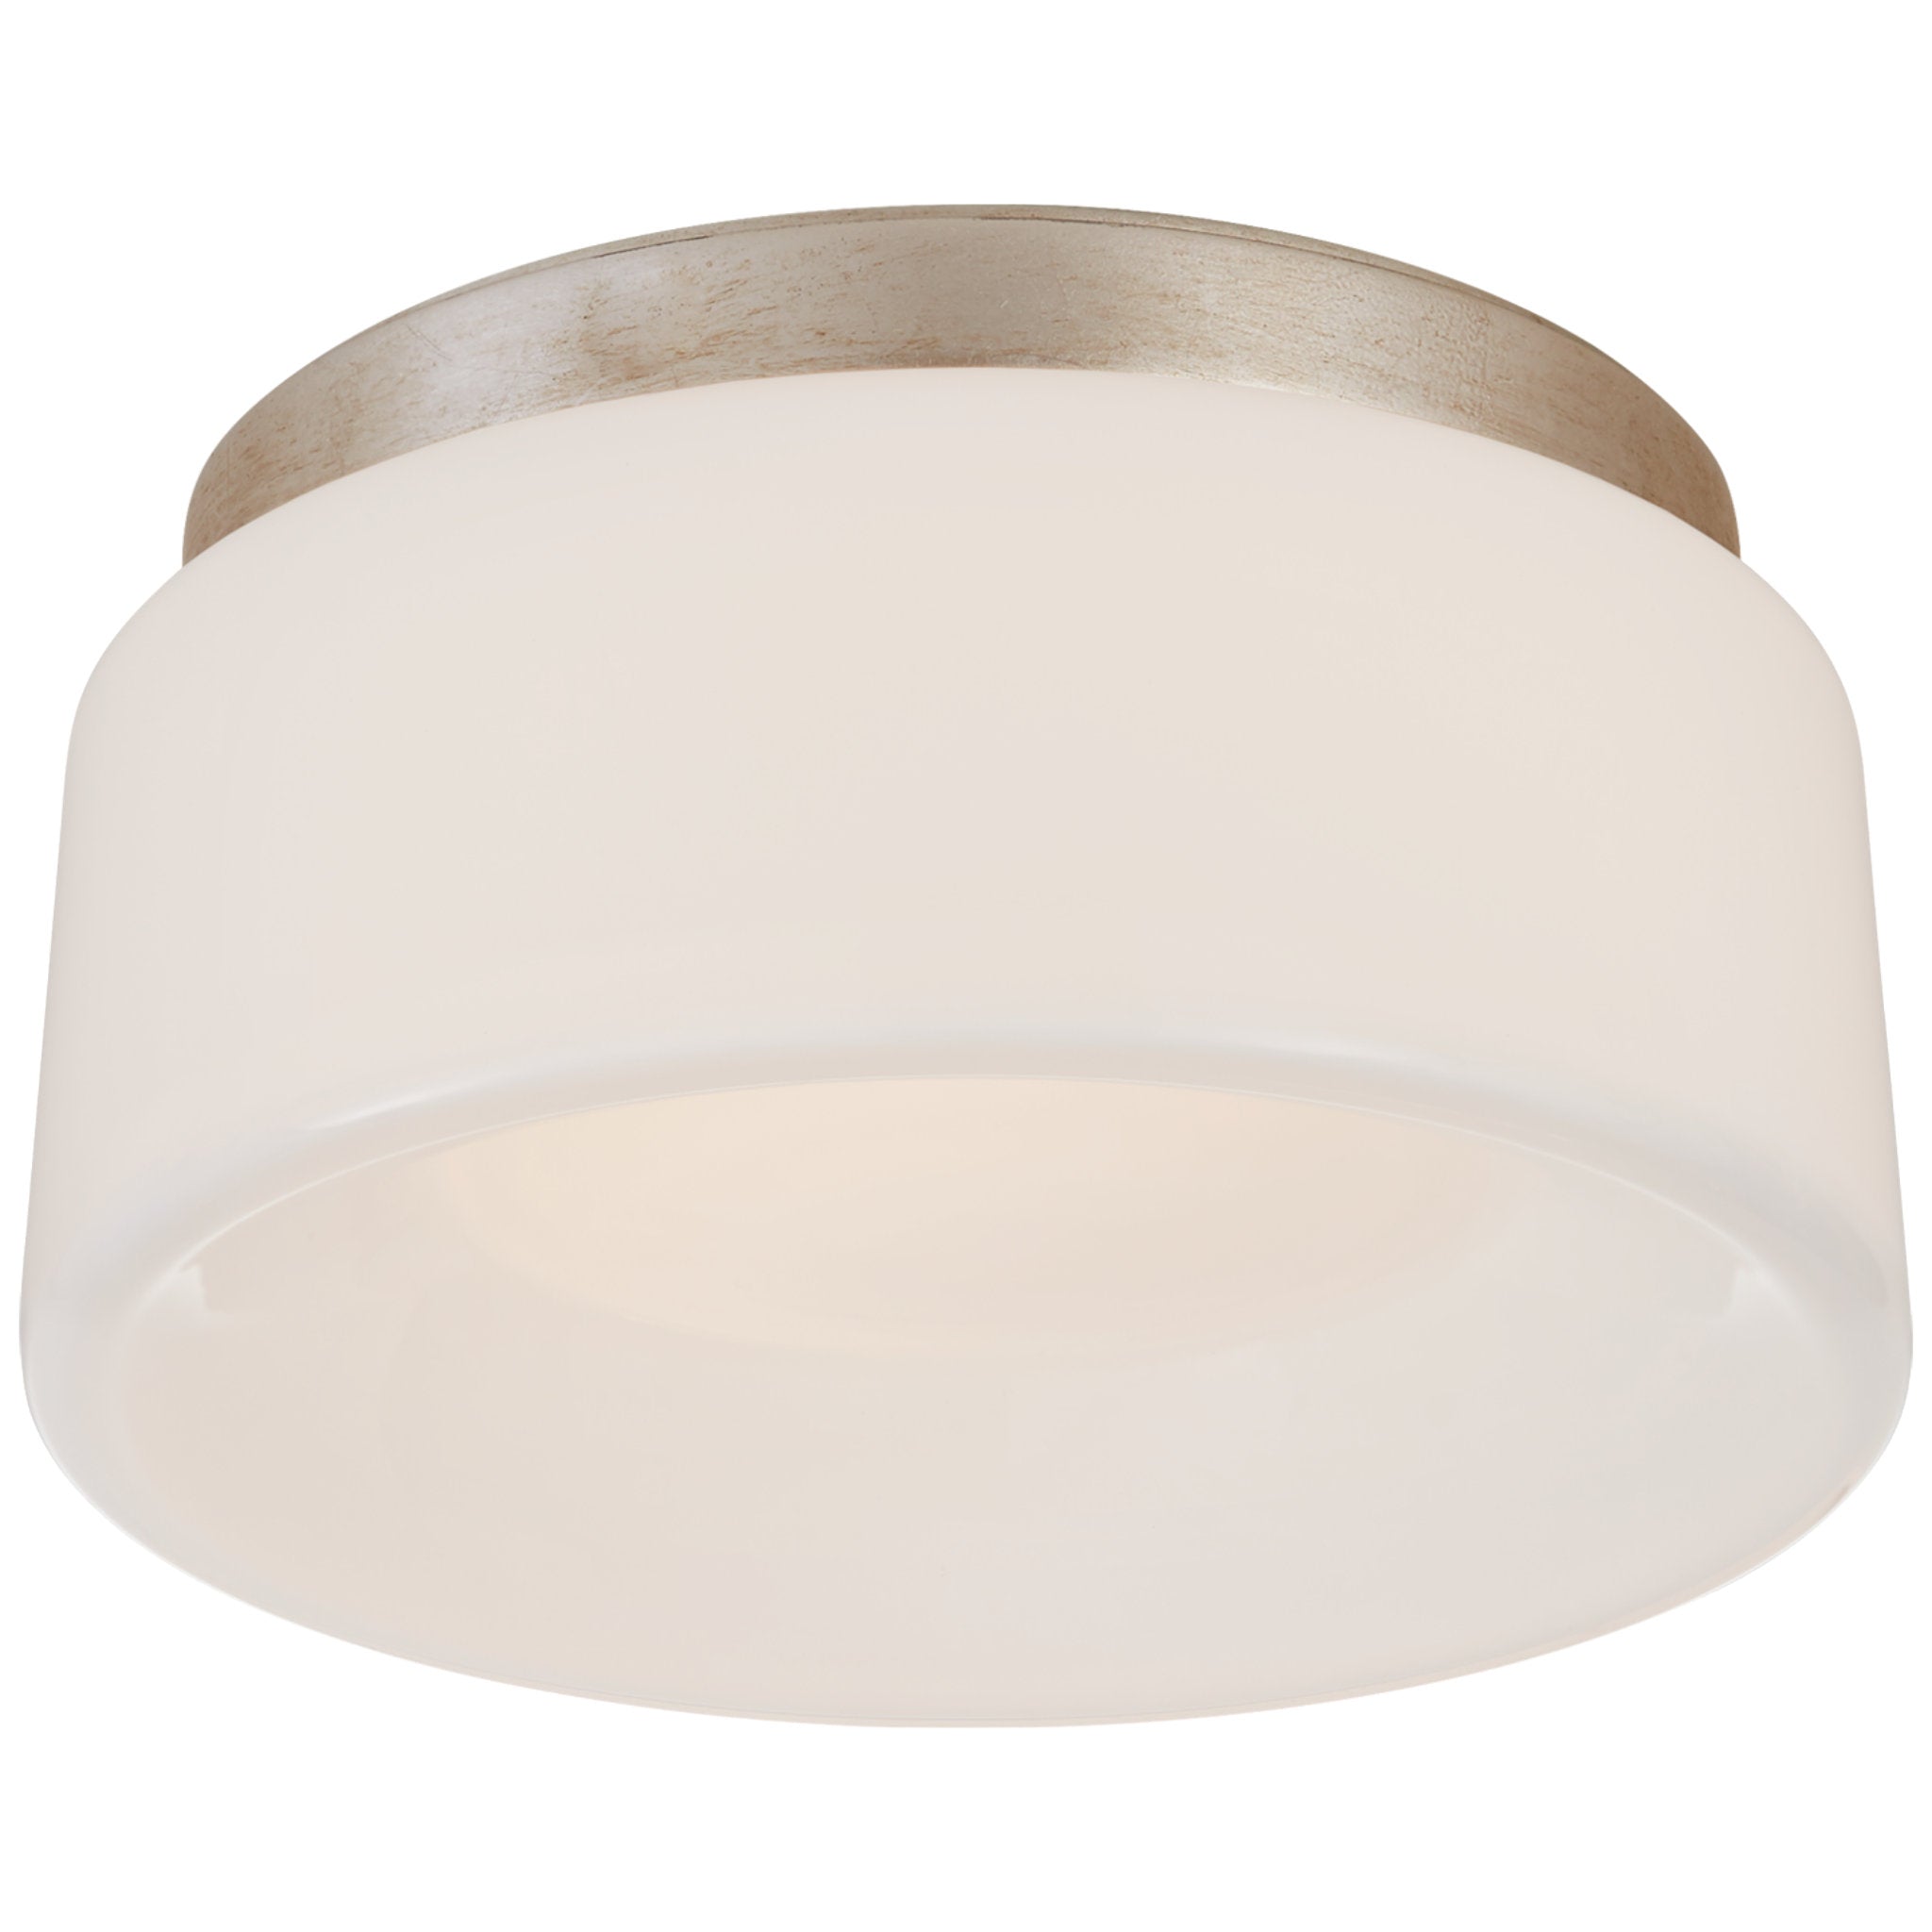 Barbara Barry Halo 5.5" Solitaire Flush Mount in Burnished Silver Leaf with White Glass